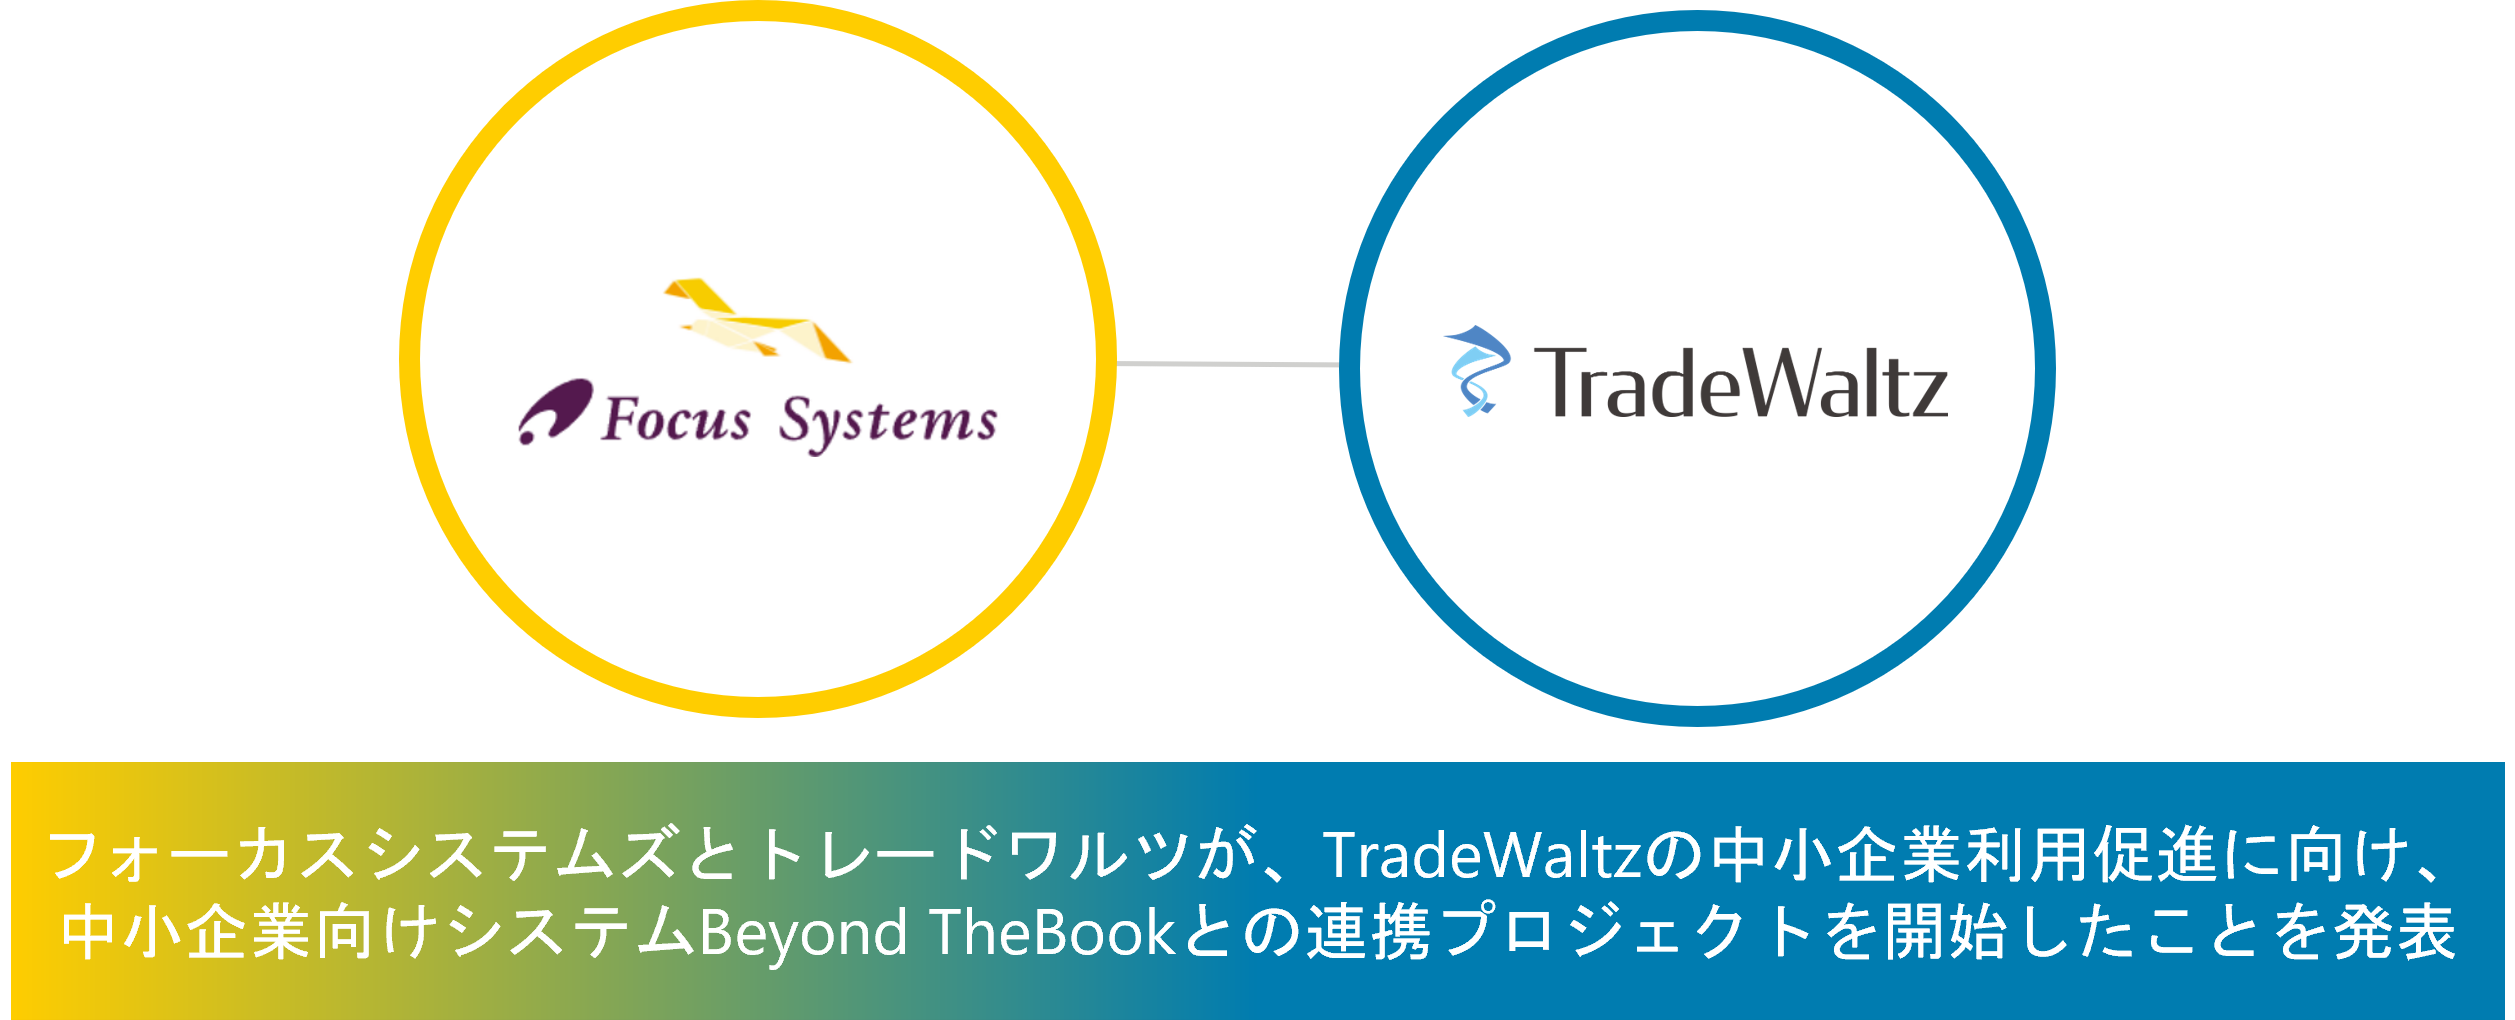 TradeWaltz and Beyond TheBook started collaboration to expand the DX market for small and medium-sized companies in the trade industry through a partnership between Focus Systems and TradeWaltz Inc.